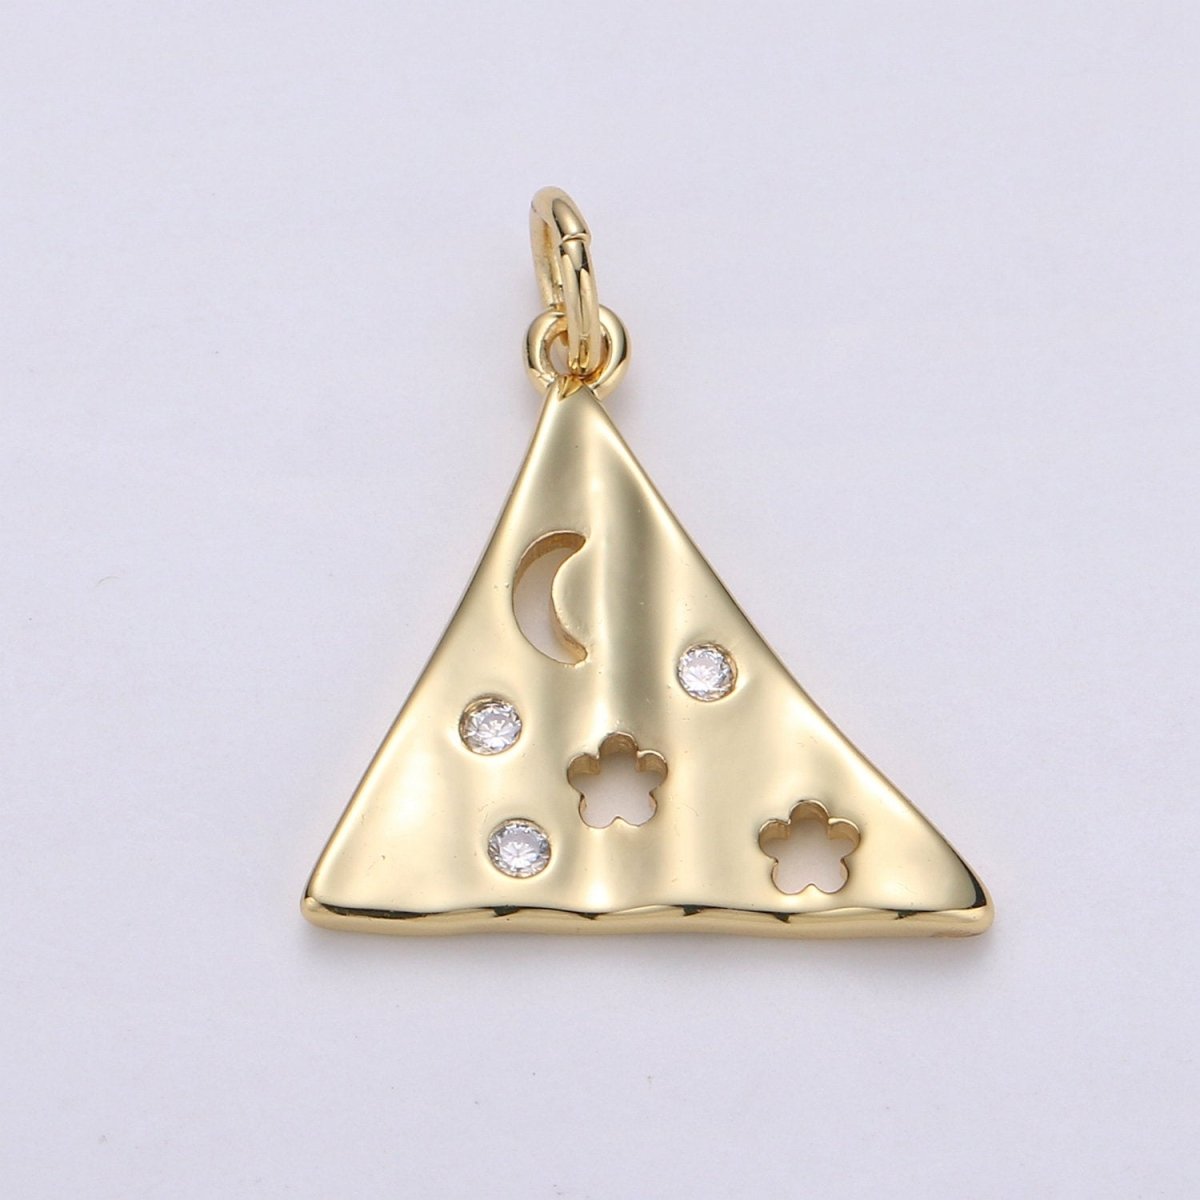 Dainty Triangle Charm Jewelry Gold Crescent Moon and star Charm Jewelry Making Supply 24K Gold Filled Findings Charm Star JewelryC-561 - DLUXCA